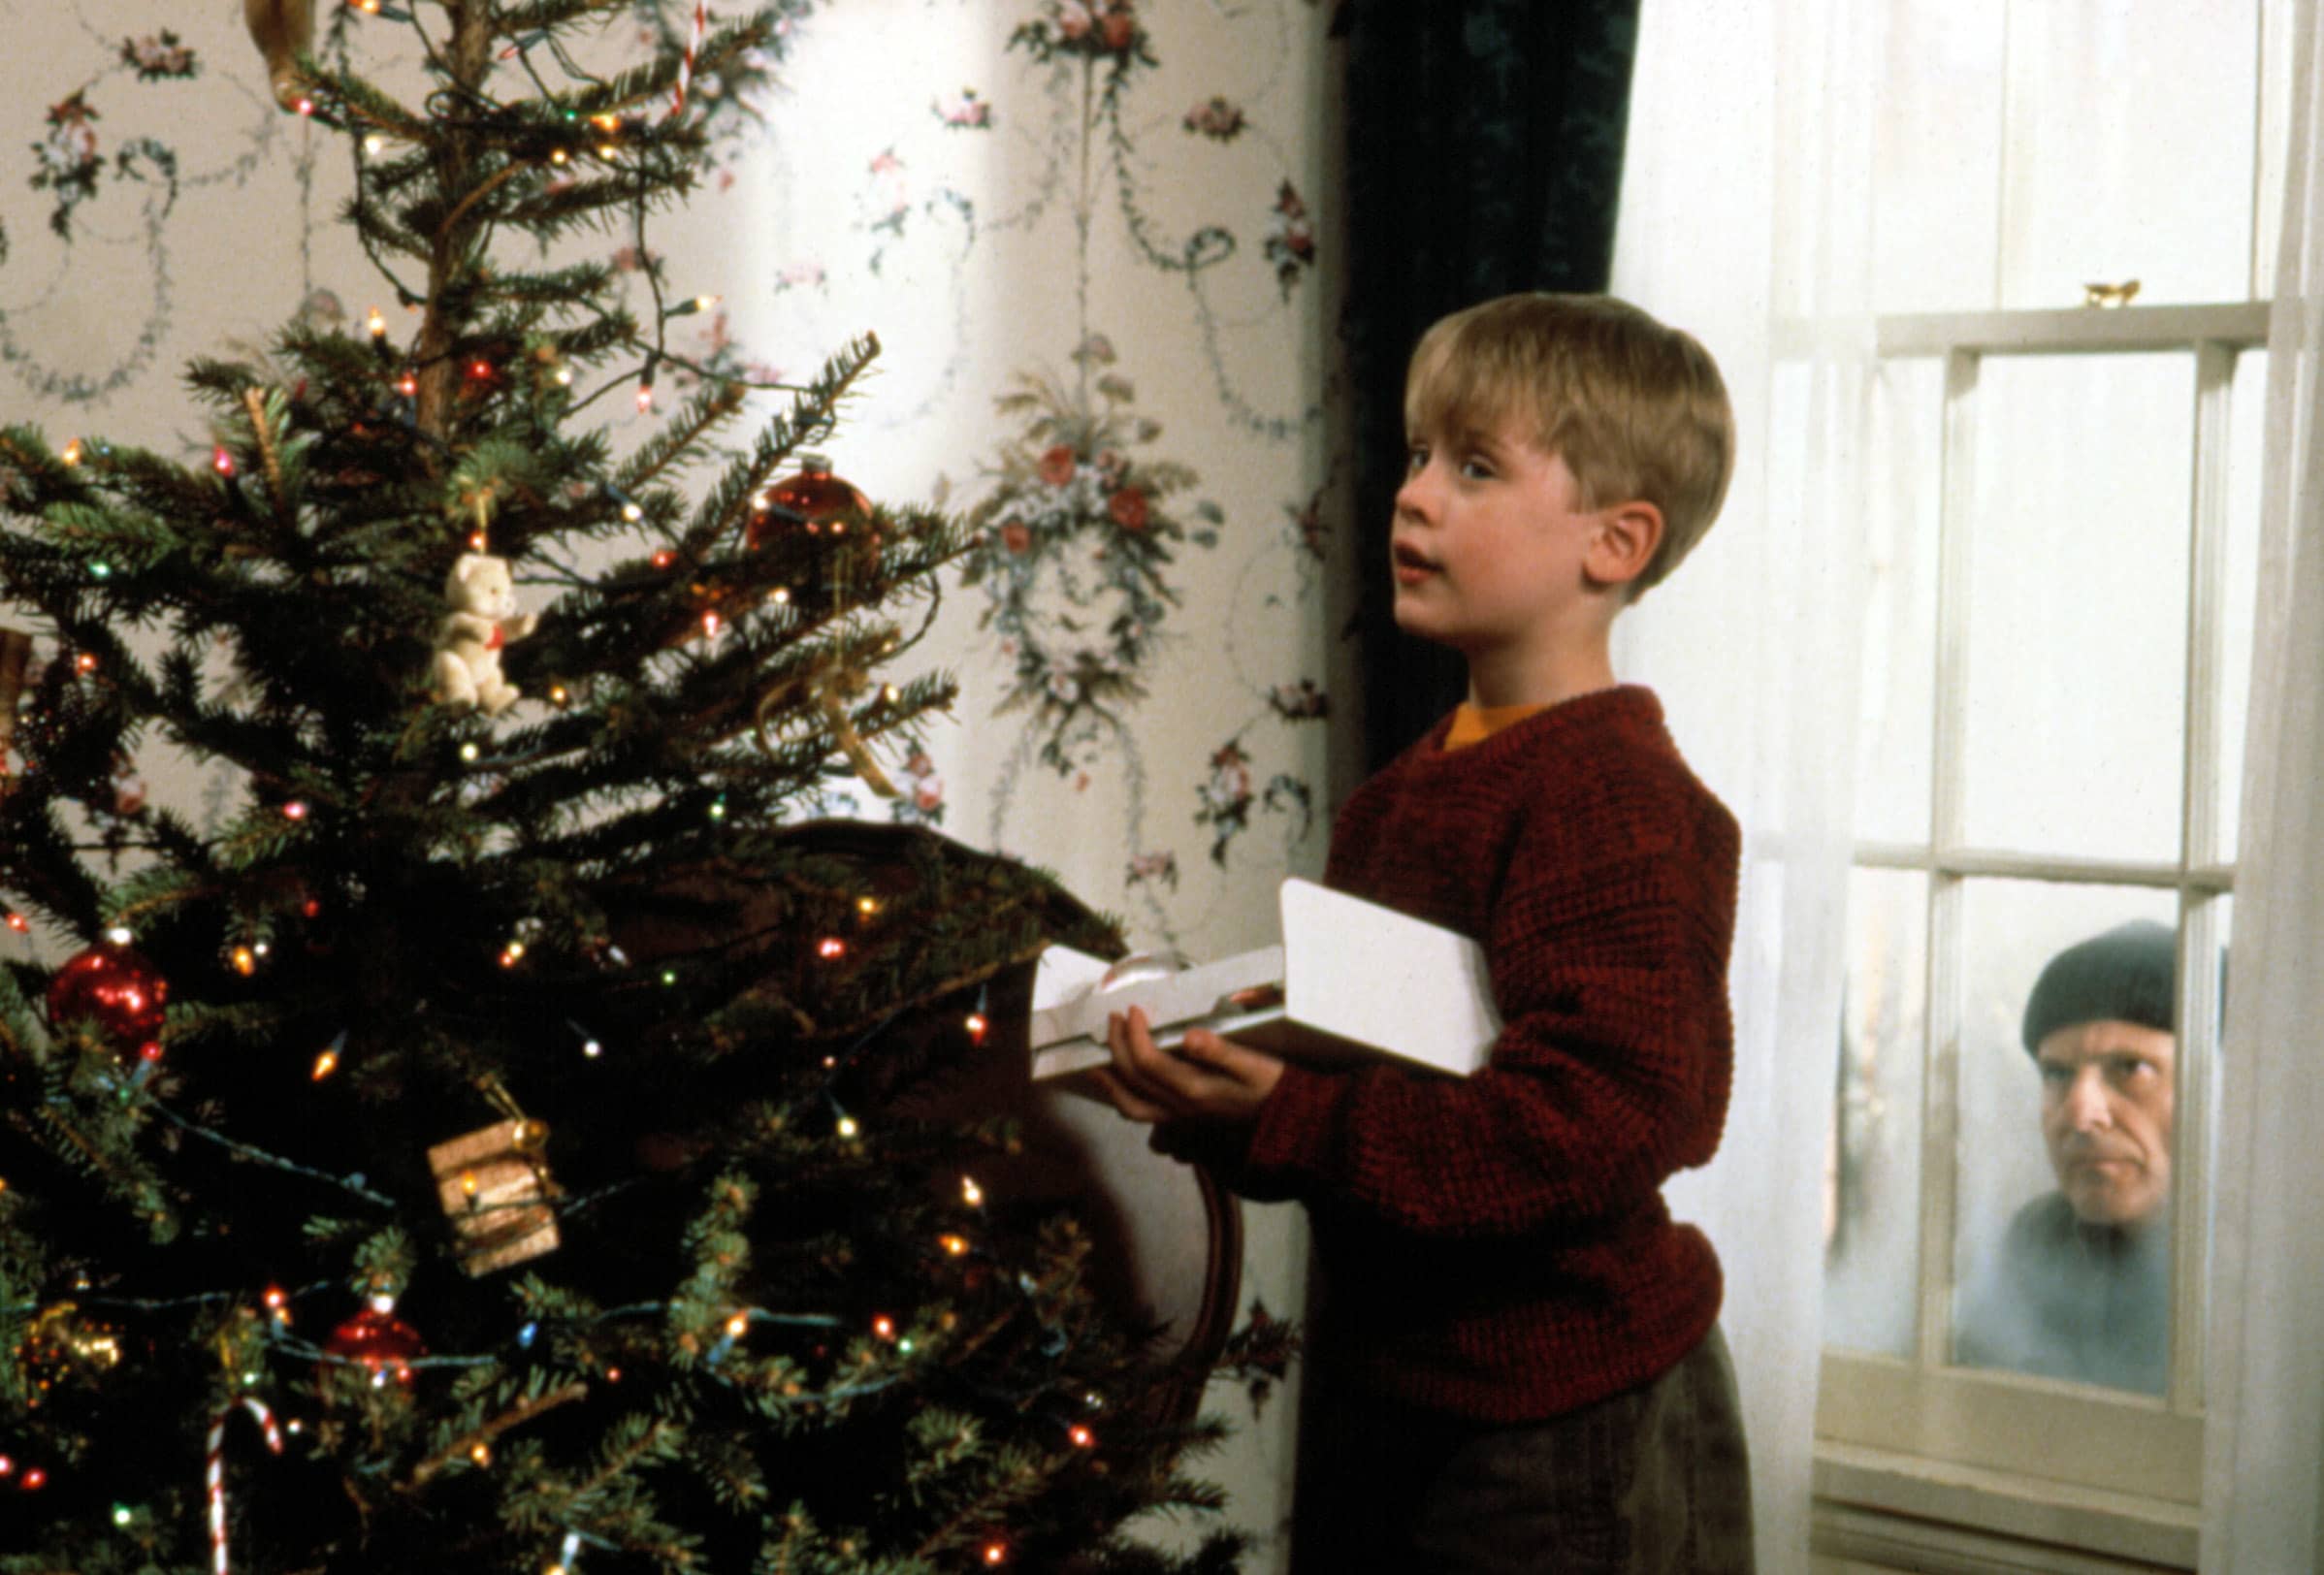 Everything You Need to Know About the House in <i>Home Alone</i>